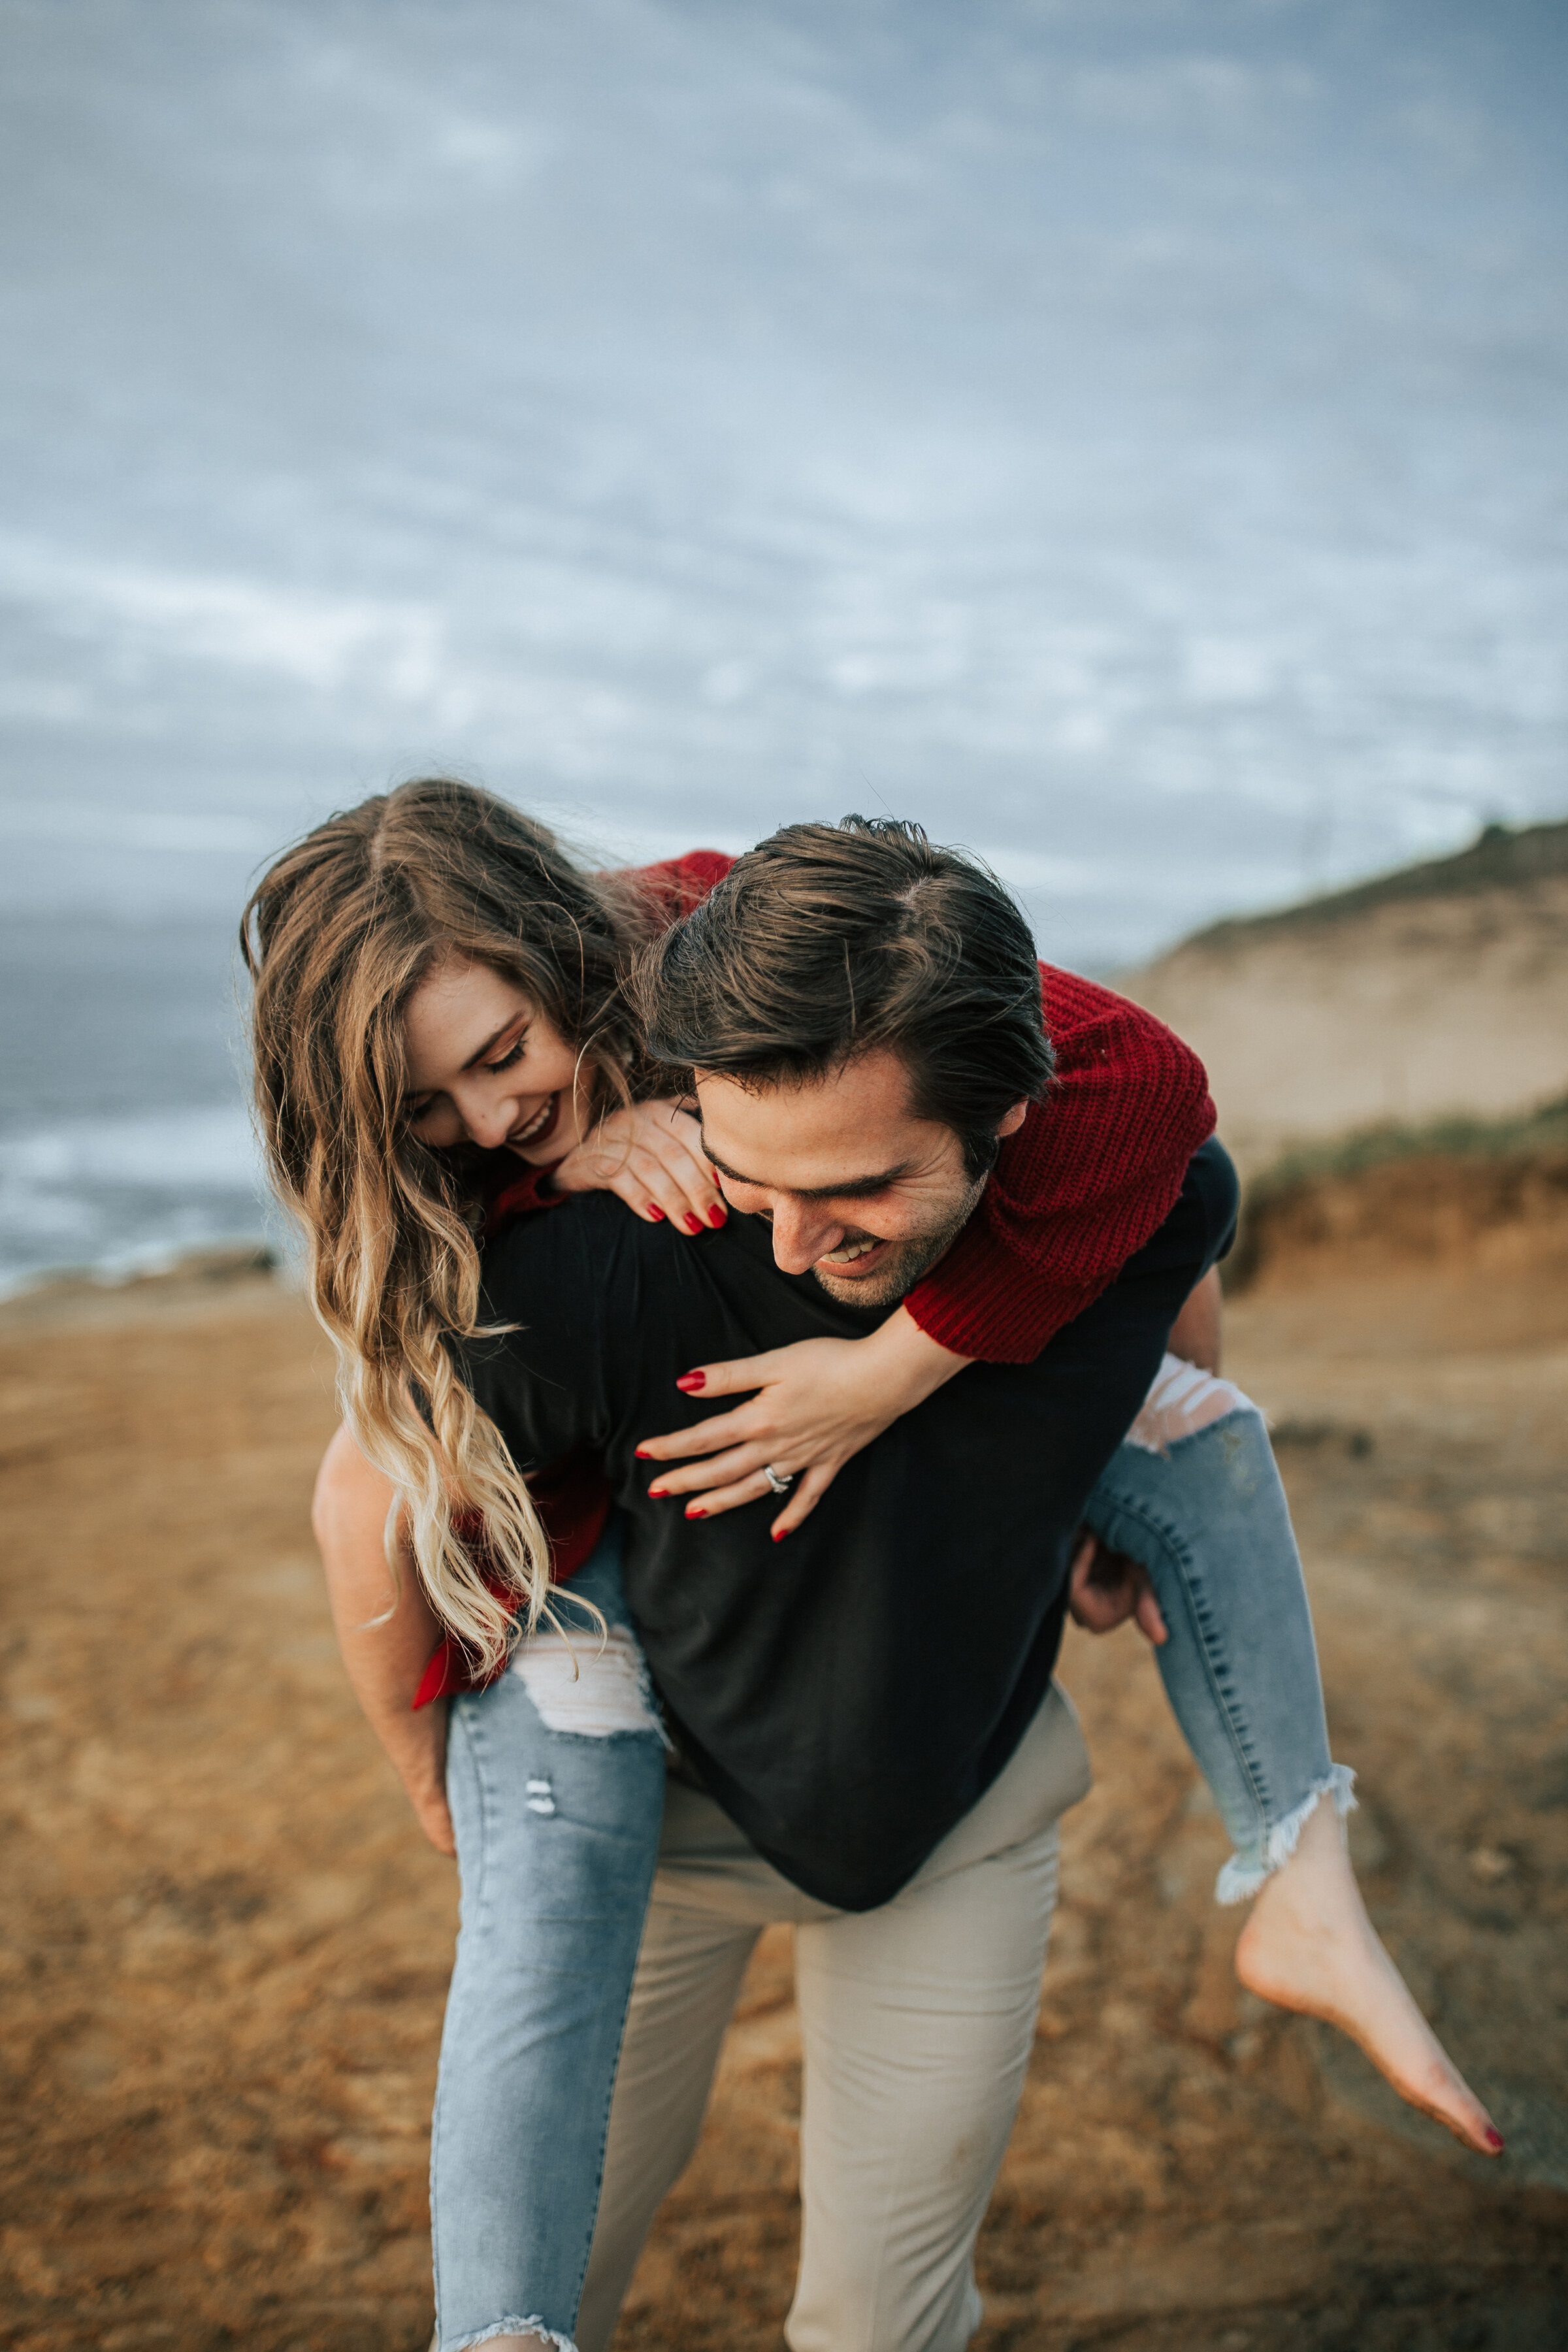  A newly engaged couple play on the sand dunes in a playful engagement session by Emily Jenkins Photography. Playful couple pose inspiration couple goals outdoor engagement session inspiration ideas and goals cloudy day engagement session inspiration